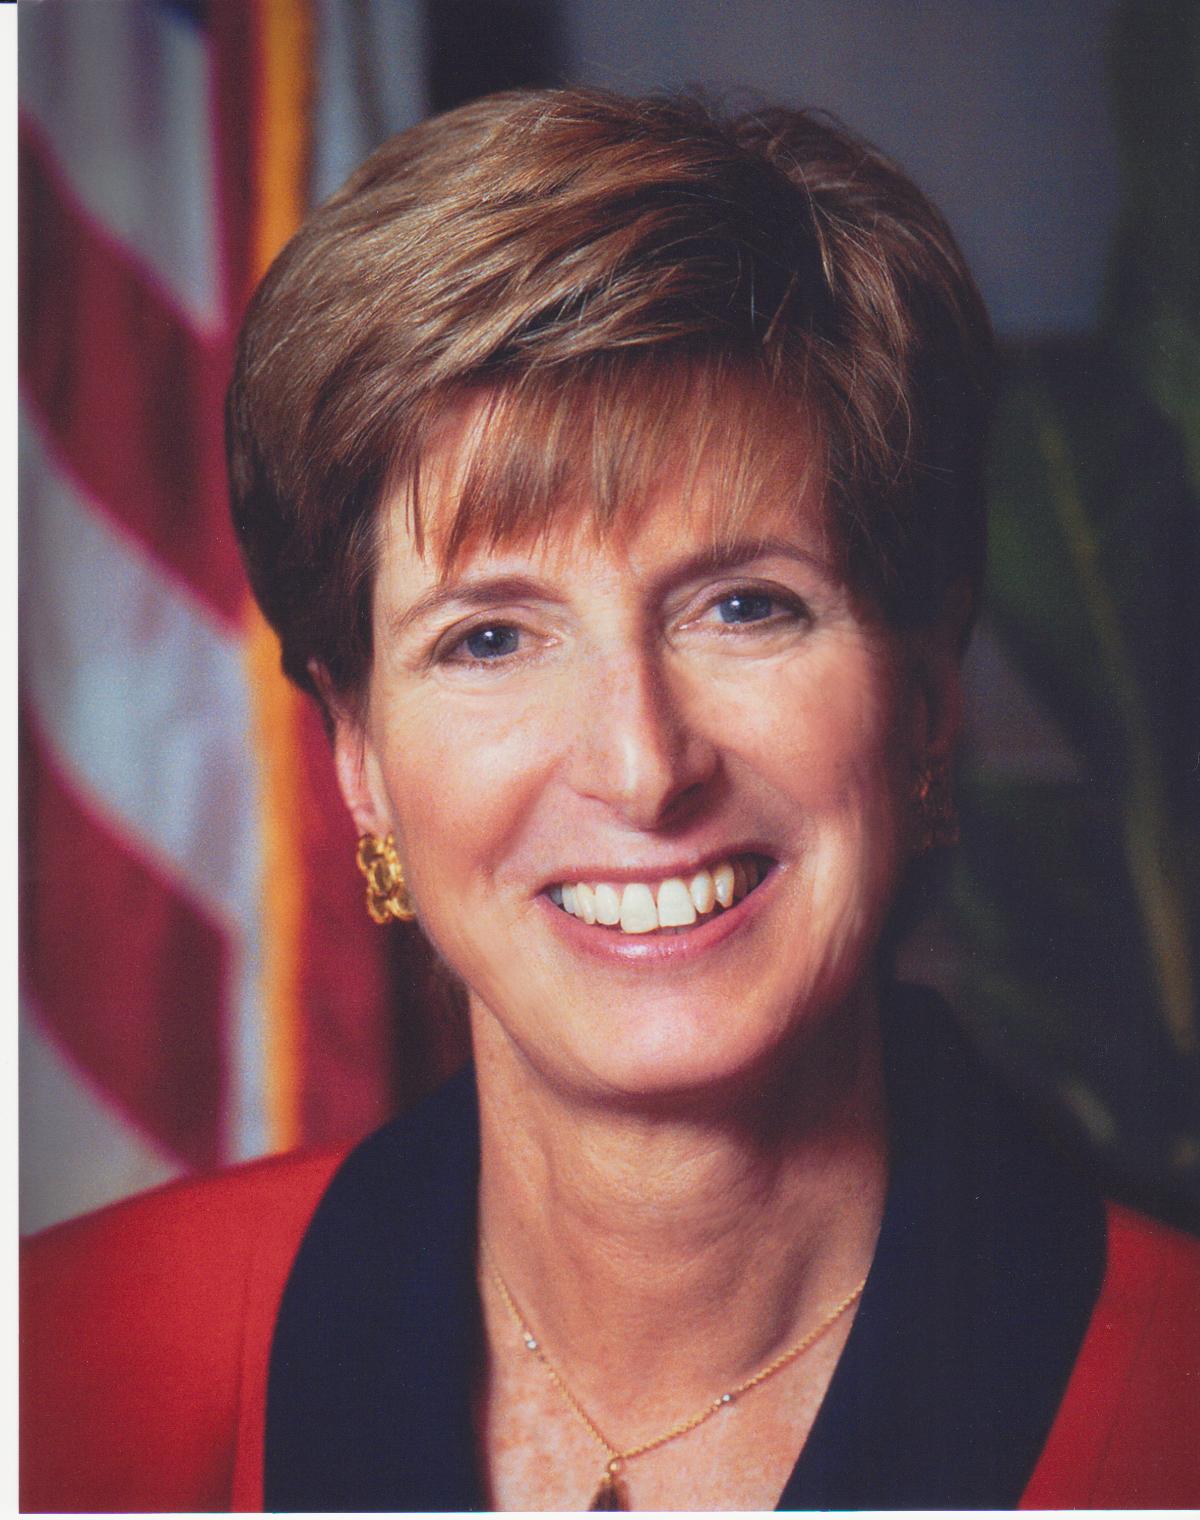 ASP’s Christine Todd Whitman on Nuclear Energy